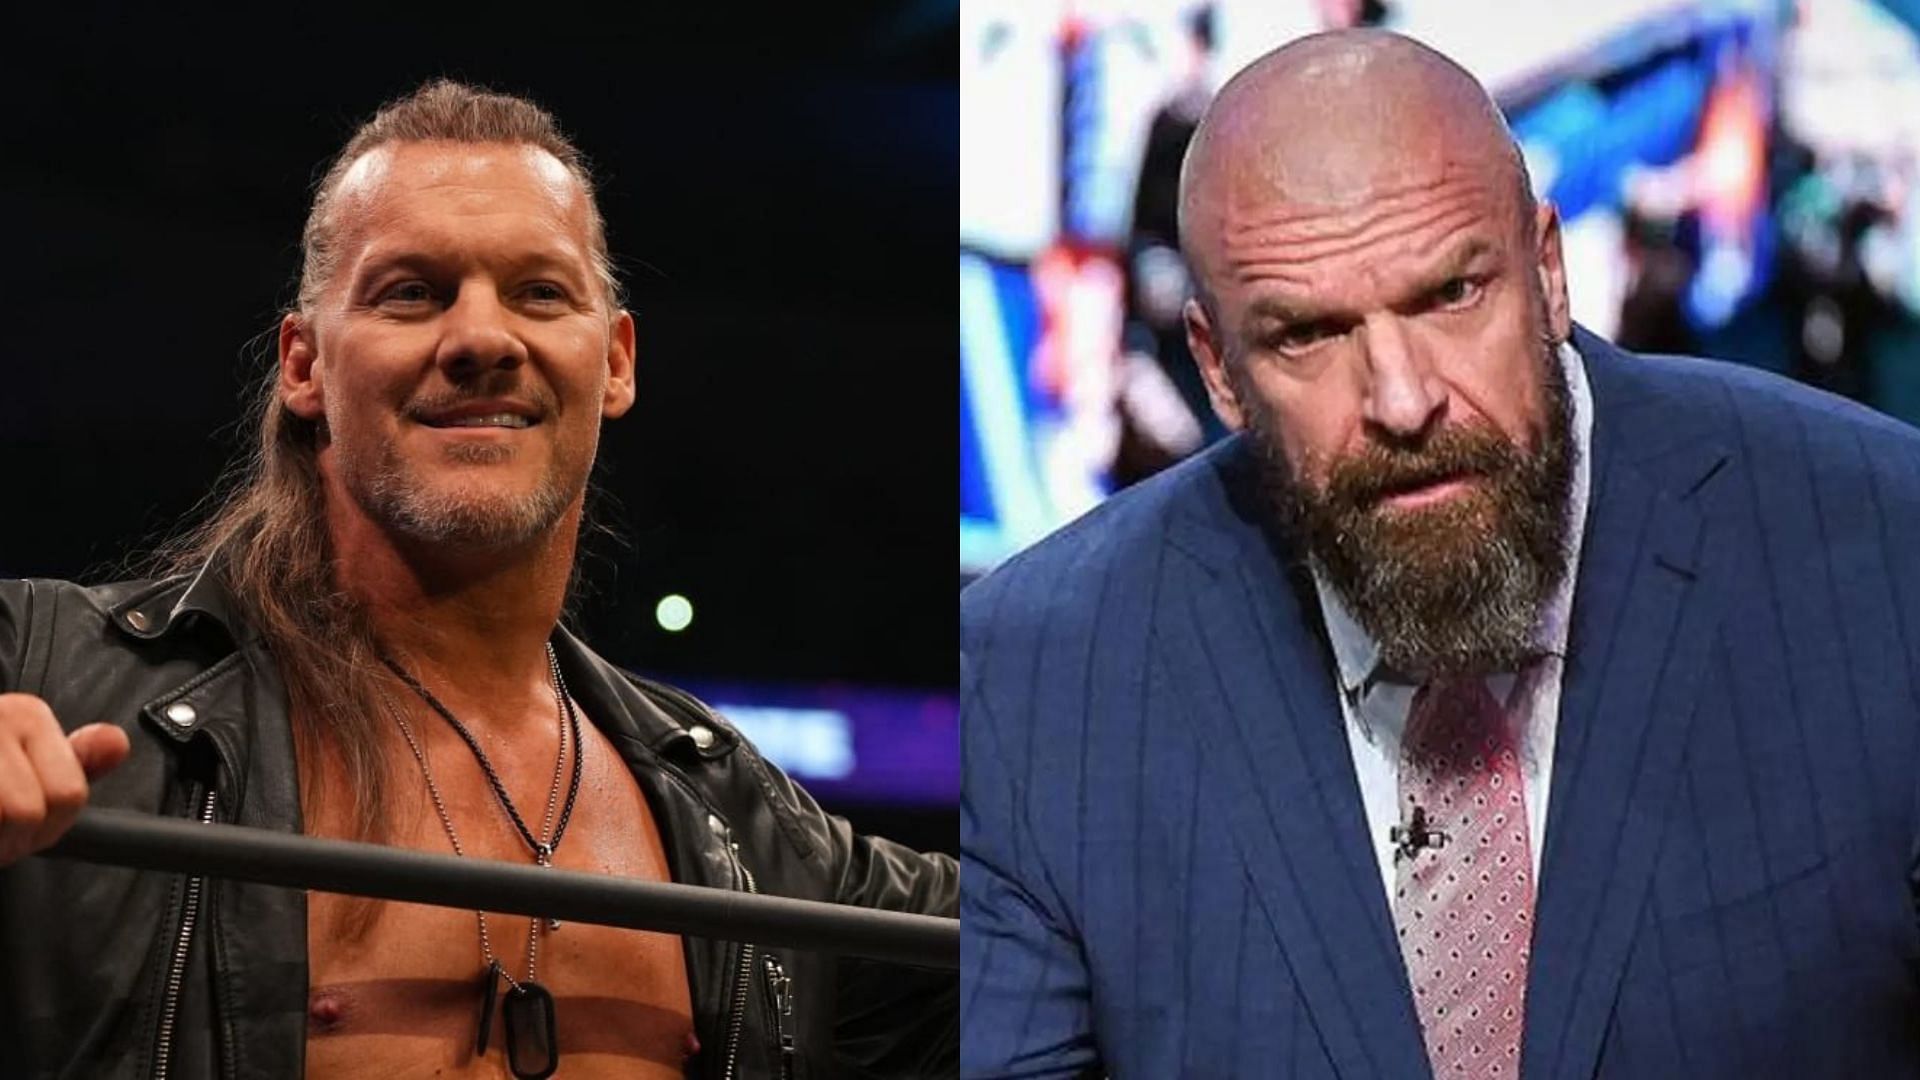 Former AEW World Champion Chris Jericho and WWE Chief Content Officer Triple H